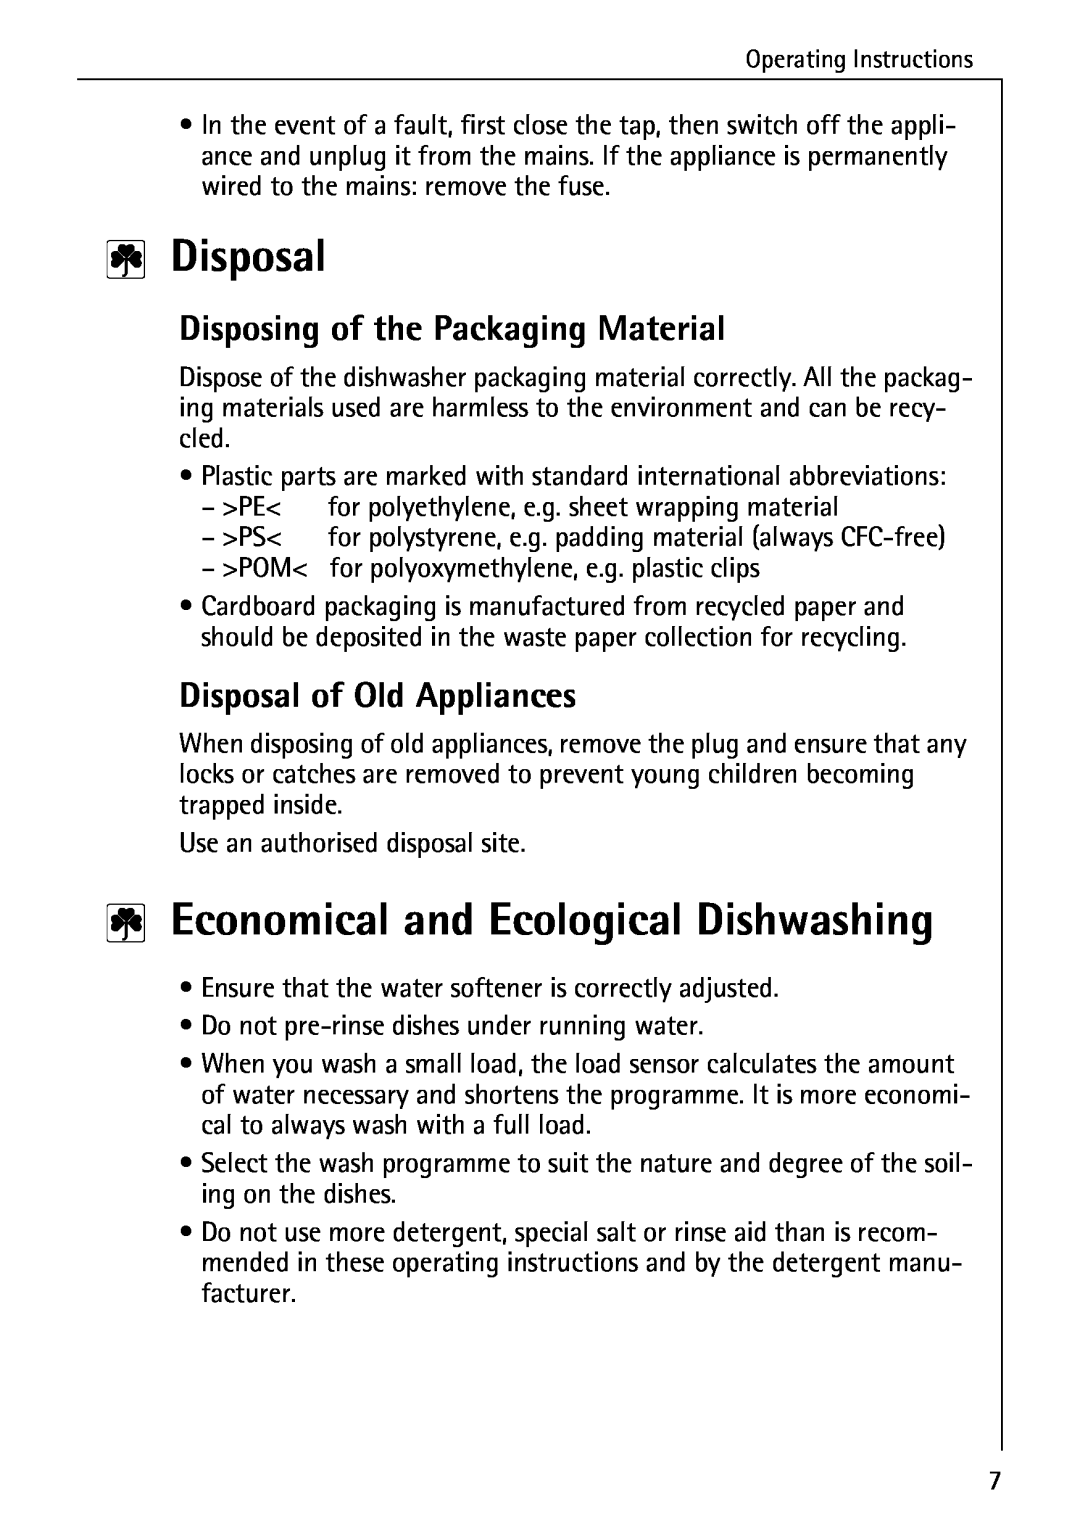 AEG 40740 manual Economical and Ecological Dishwashing, Disposing of the Packaging Material, Disposal of Old Appliances 